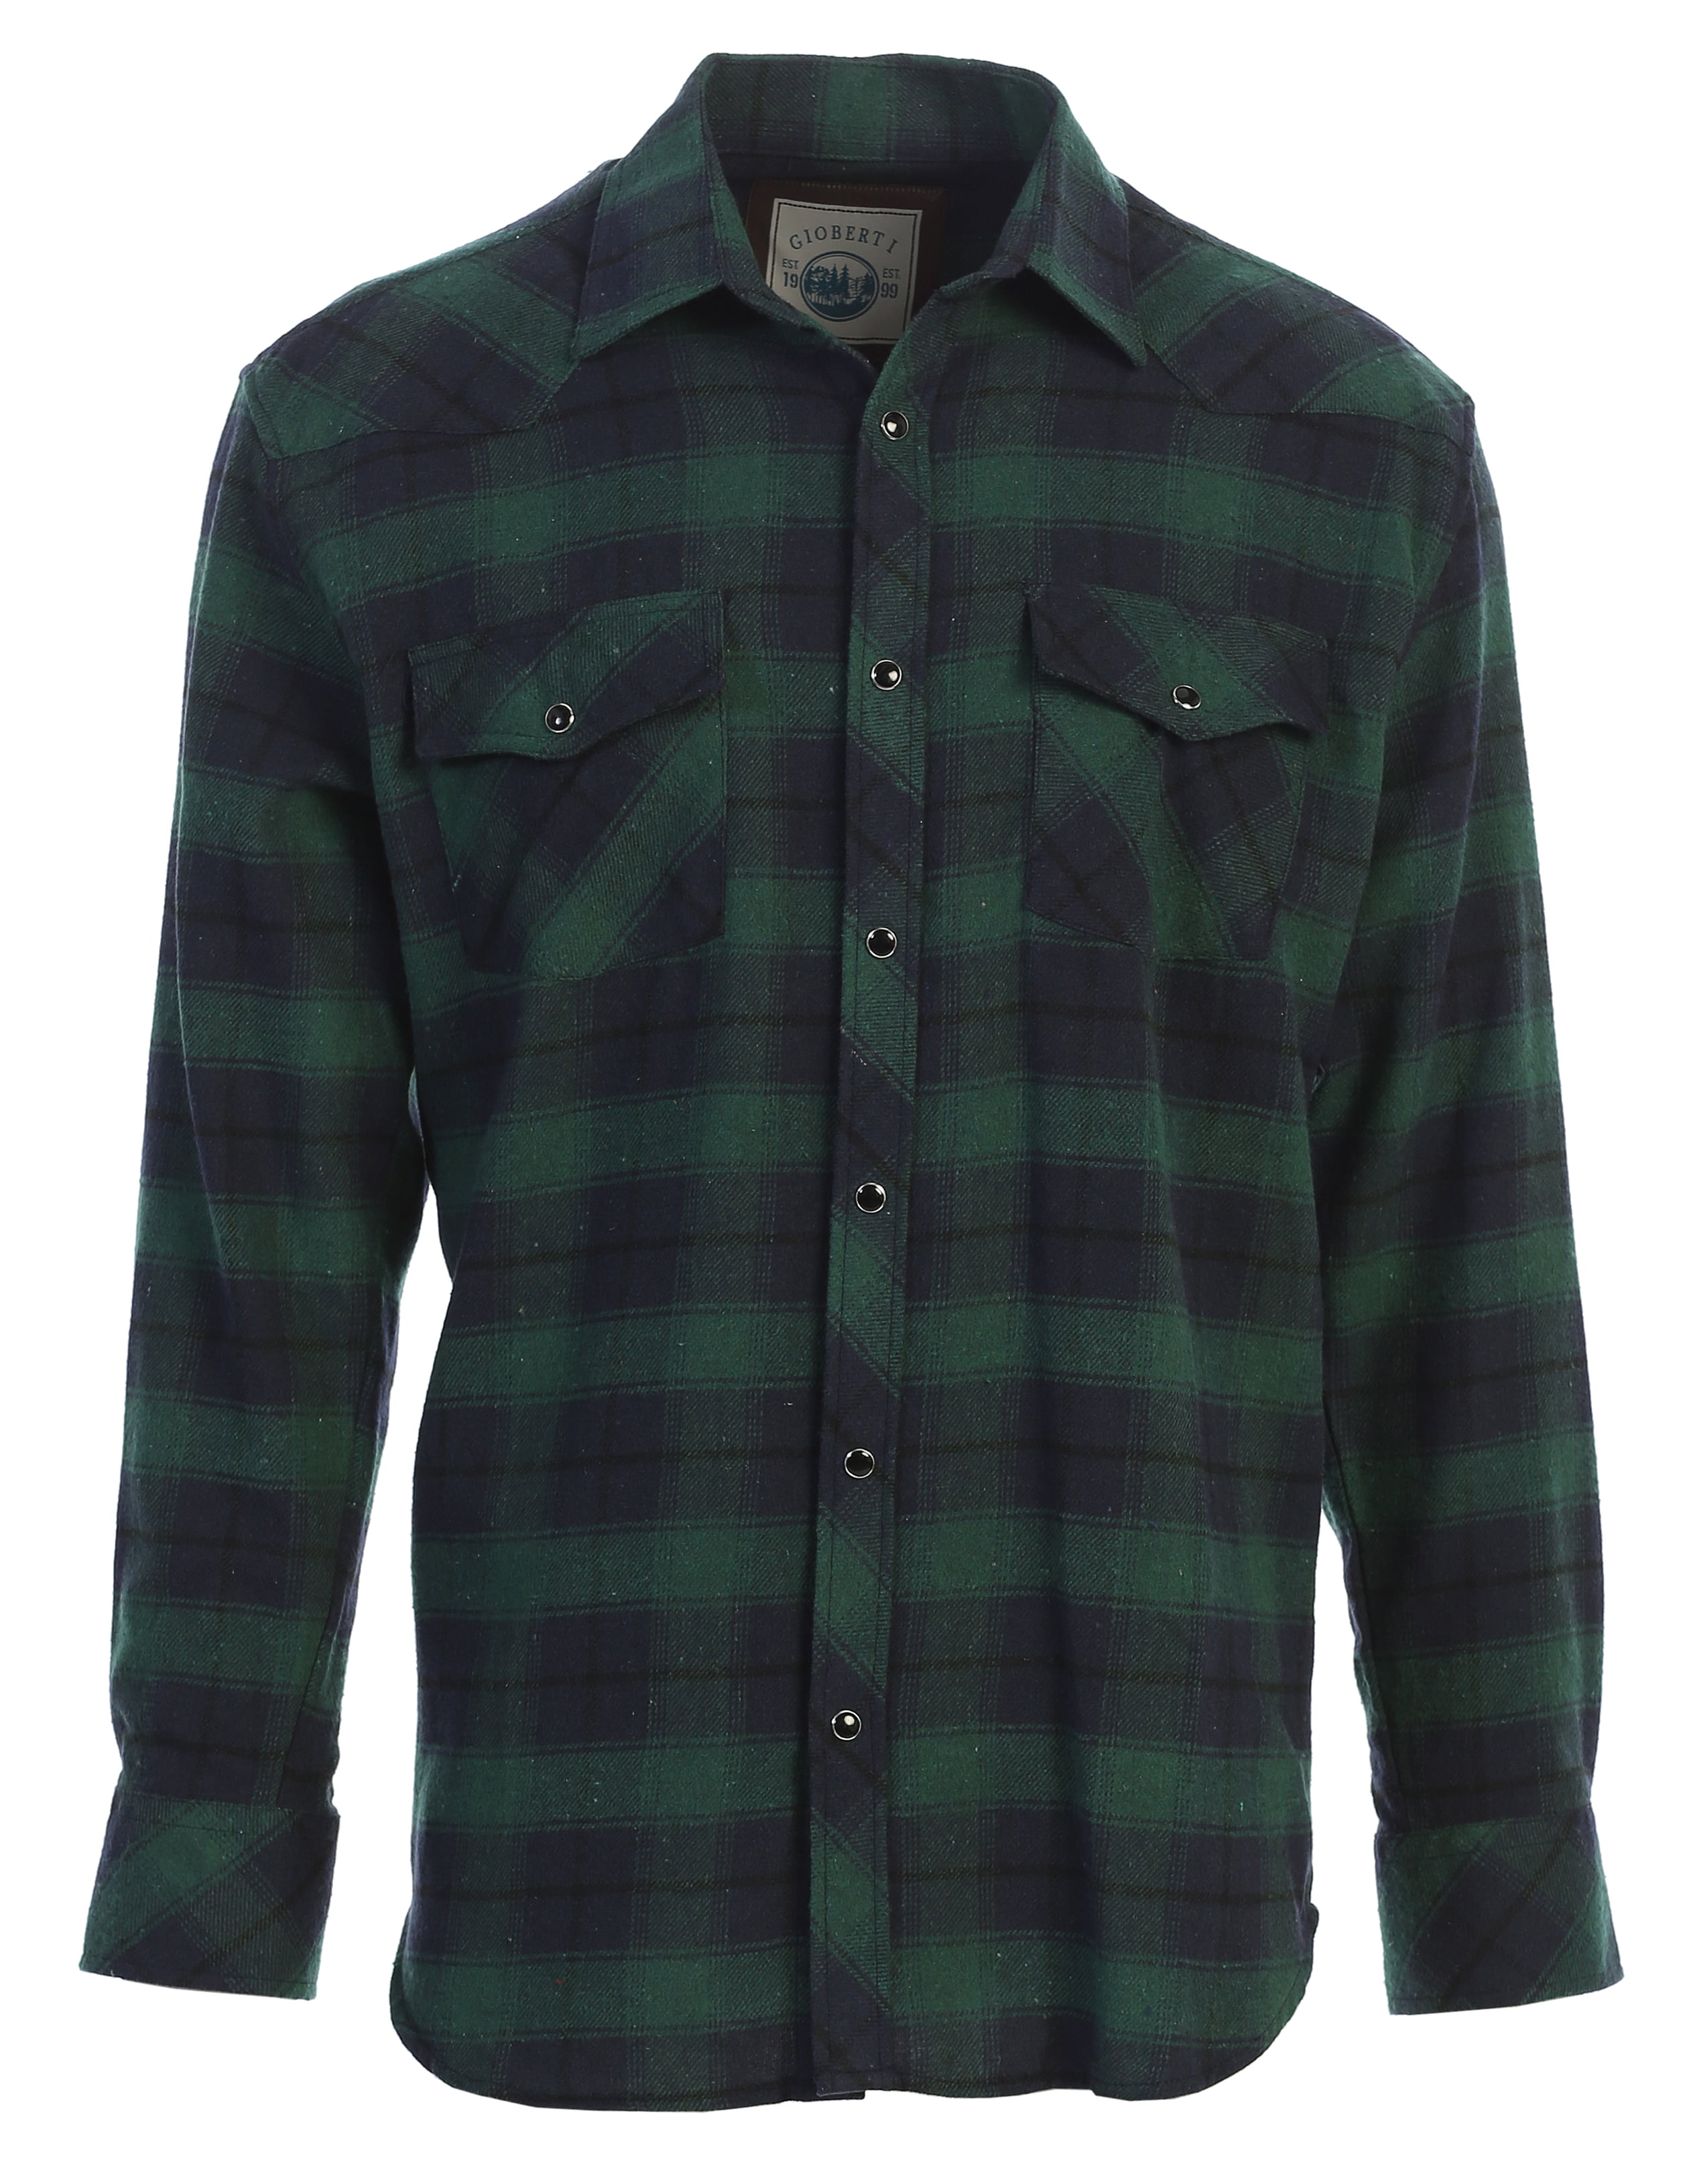 Gioberti Men's Western Brushed Flannel Plaid Checkered Shirt w/ Snap-on ...